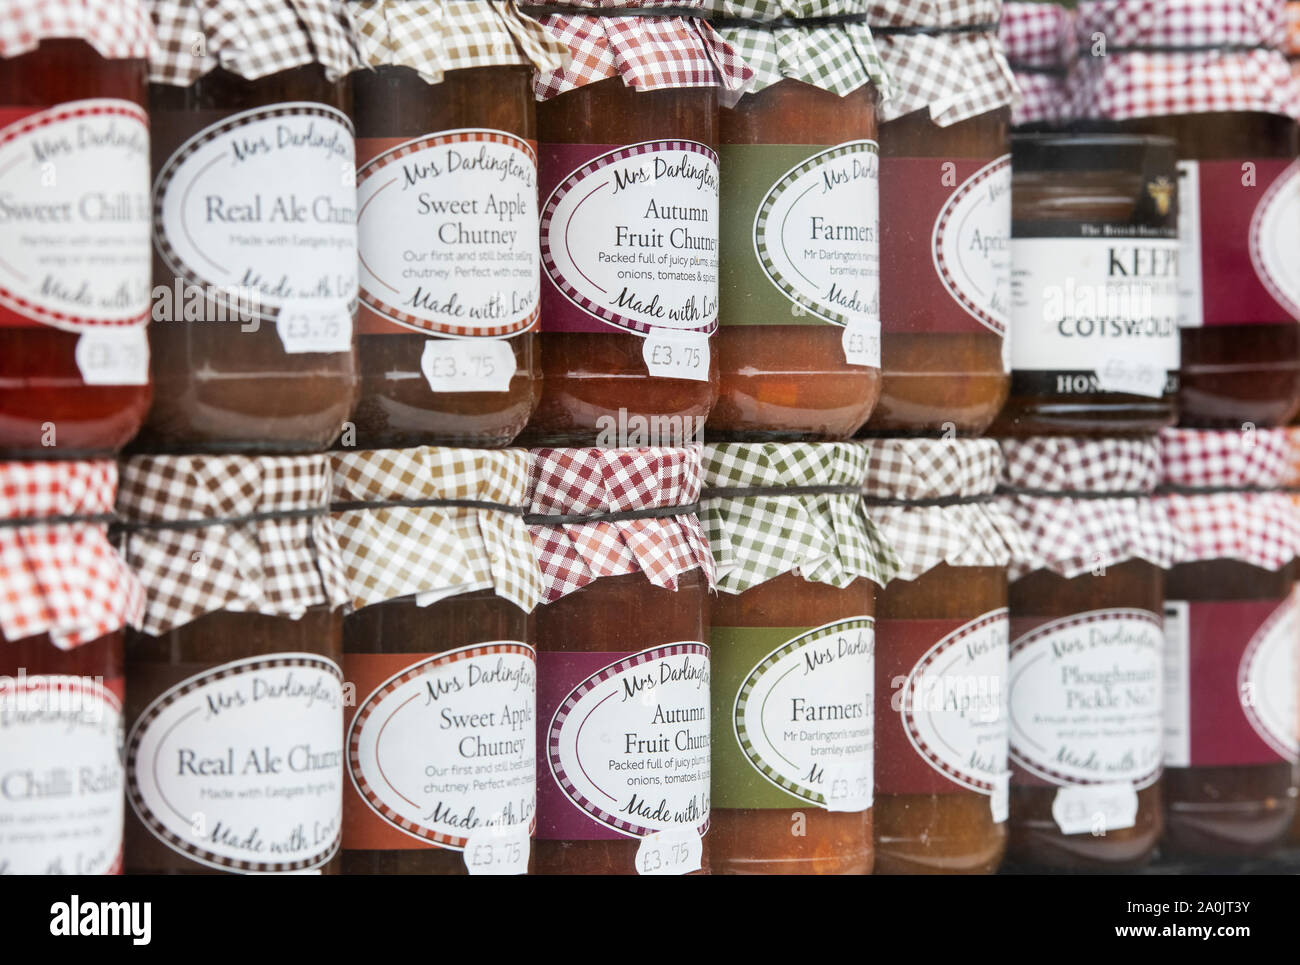 Jars of chutney in a shop window. Bourton on the Water, Cotswolds, Gloucestershire, England Stock Photo